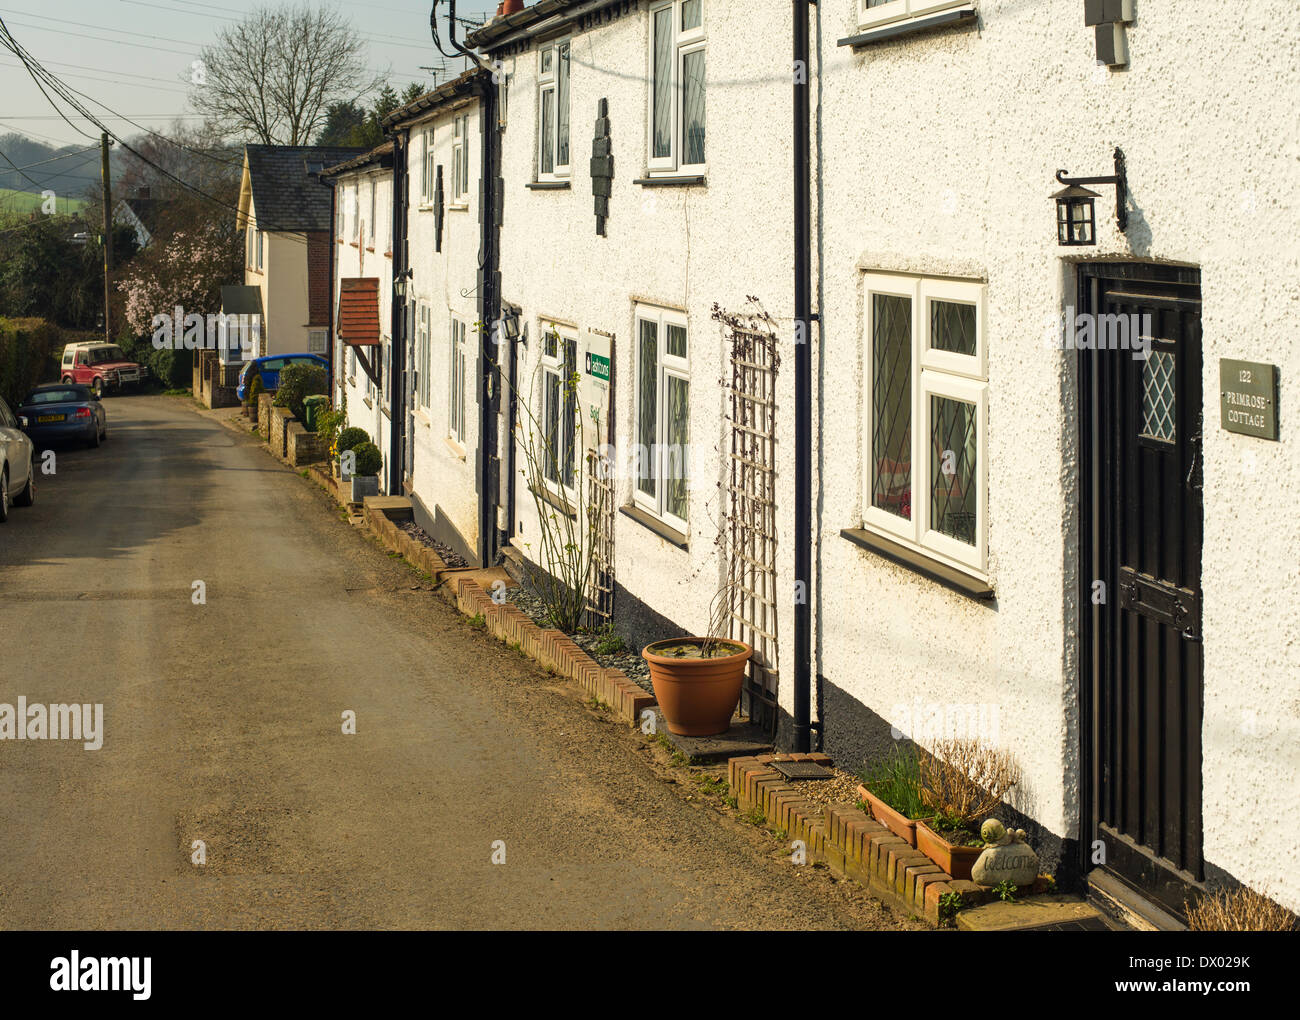 Row of cottages in Trowley Hill Road, between Flamstead and Trowley Bottom, Hertfordshire, England, UK. Stock Photo